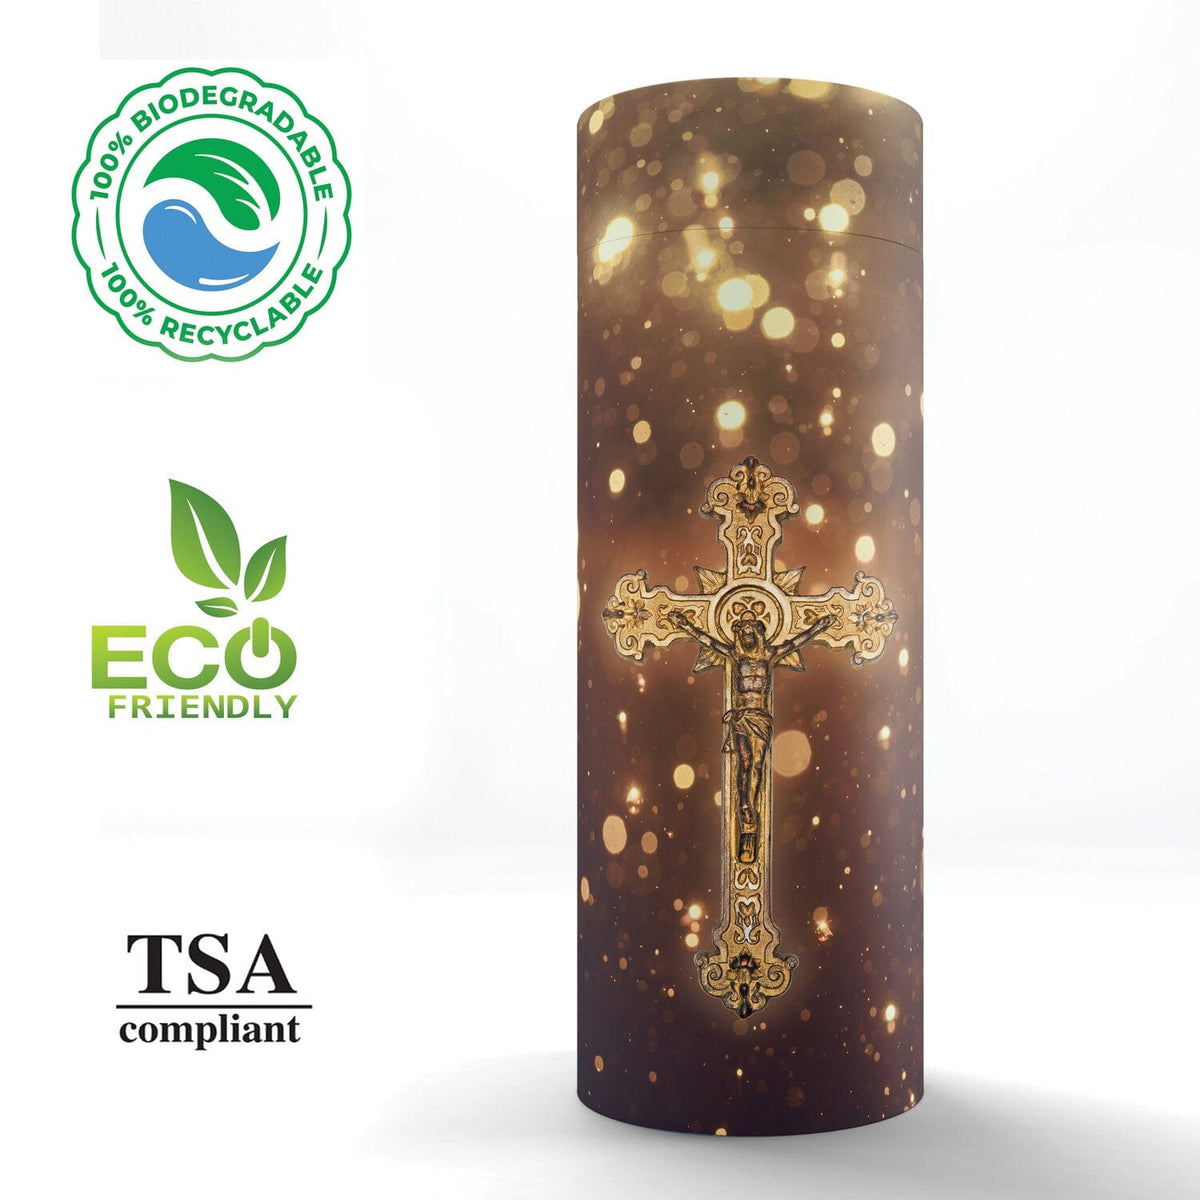 Commemorative Cremation Urns Our Lord and Savior (Gold) - Biodegradable &amp; Eco Friendly Burial or Scattering Urn / Tube